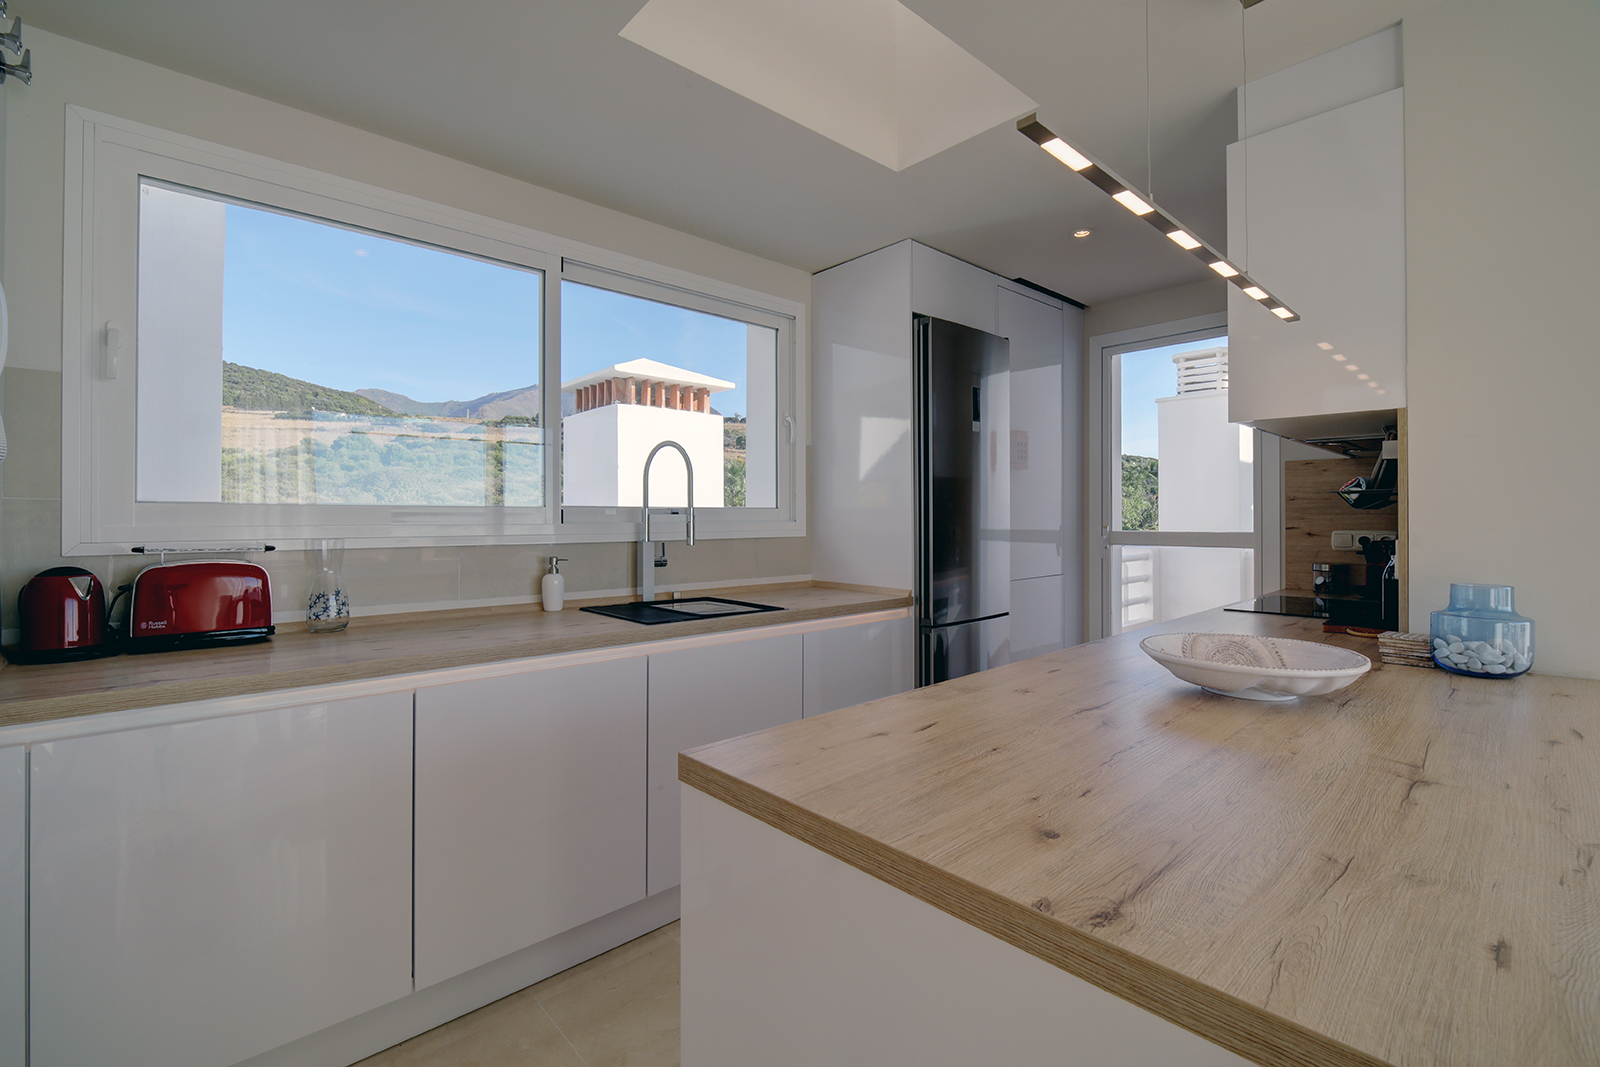 Image shows open kitchen space with window and views to mountains